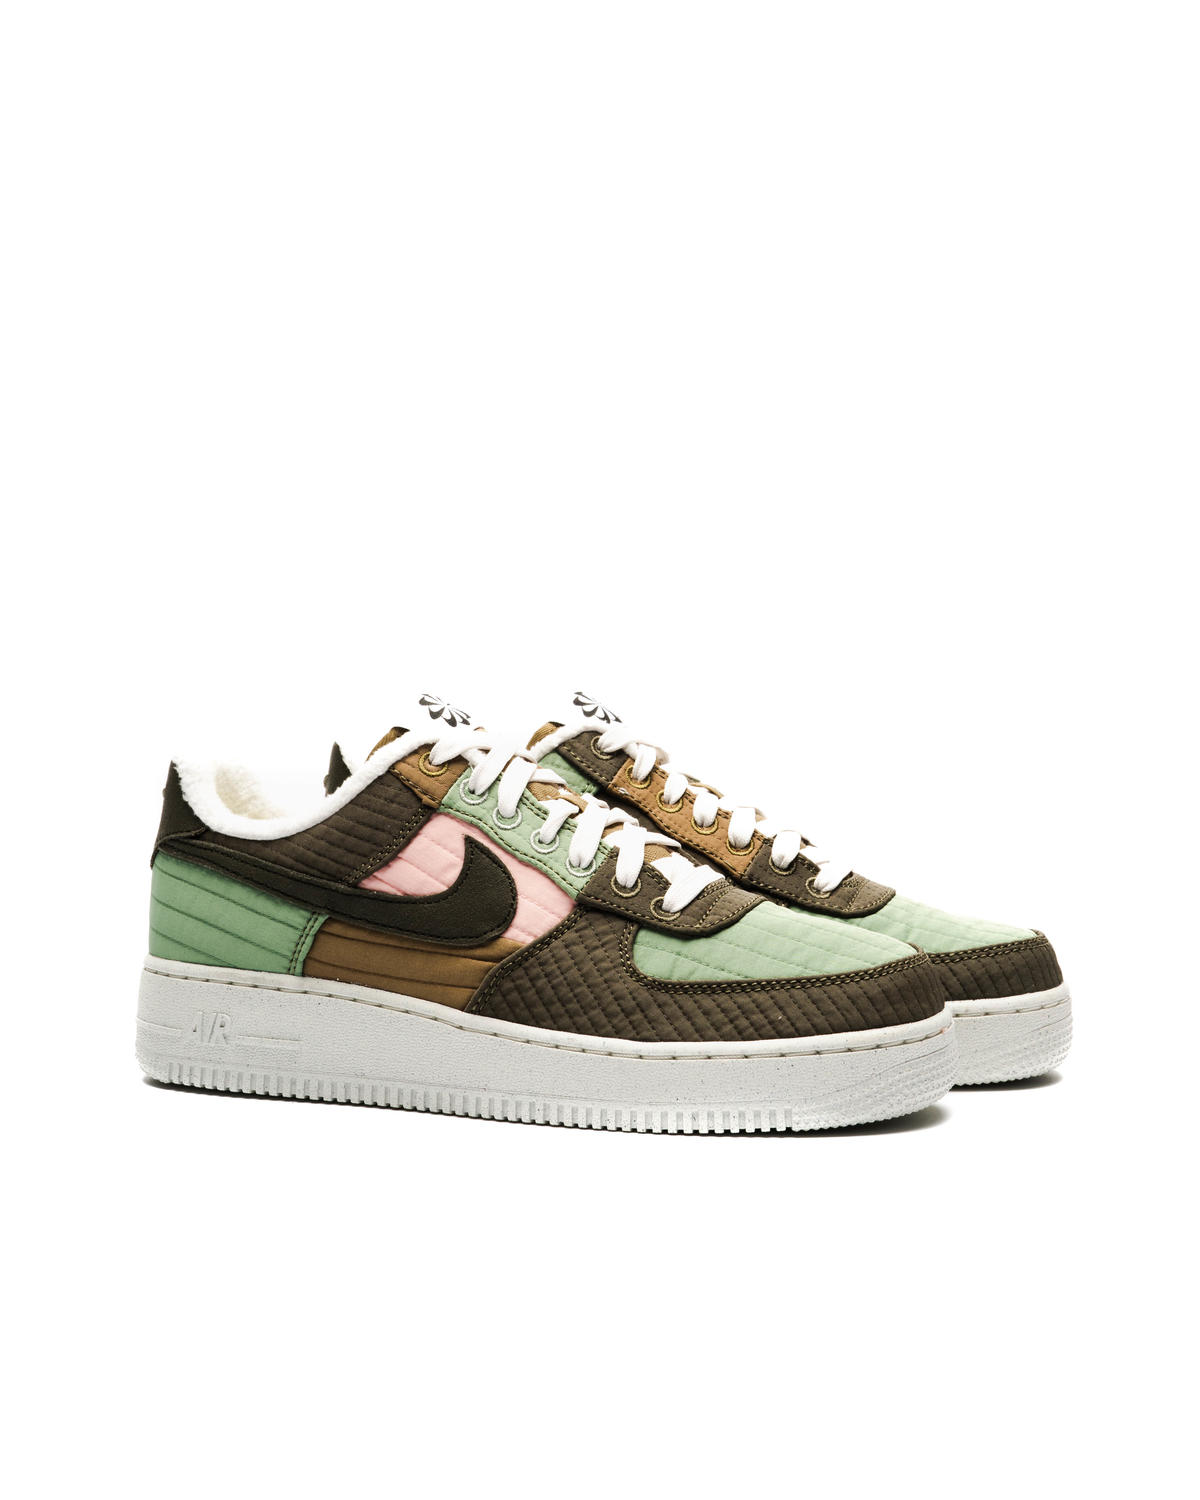 Nike Air Force 1 '07 SE Women's Shoes Outdoor Green/Outdoor Green  aa0287-300 